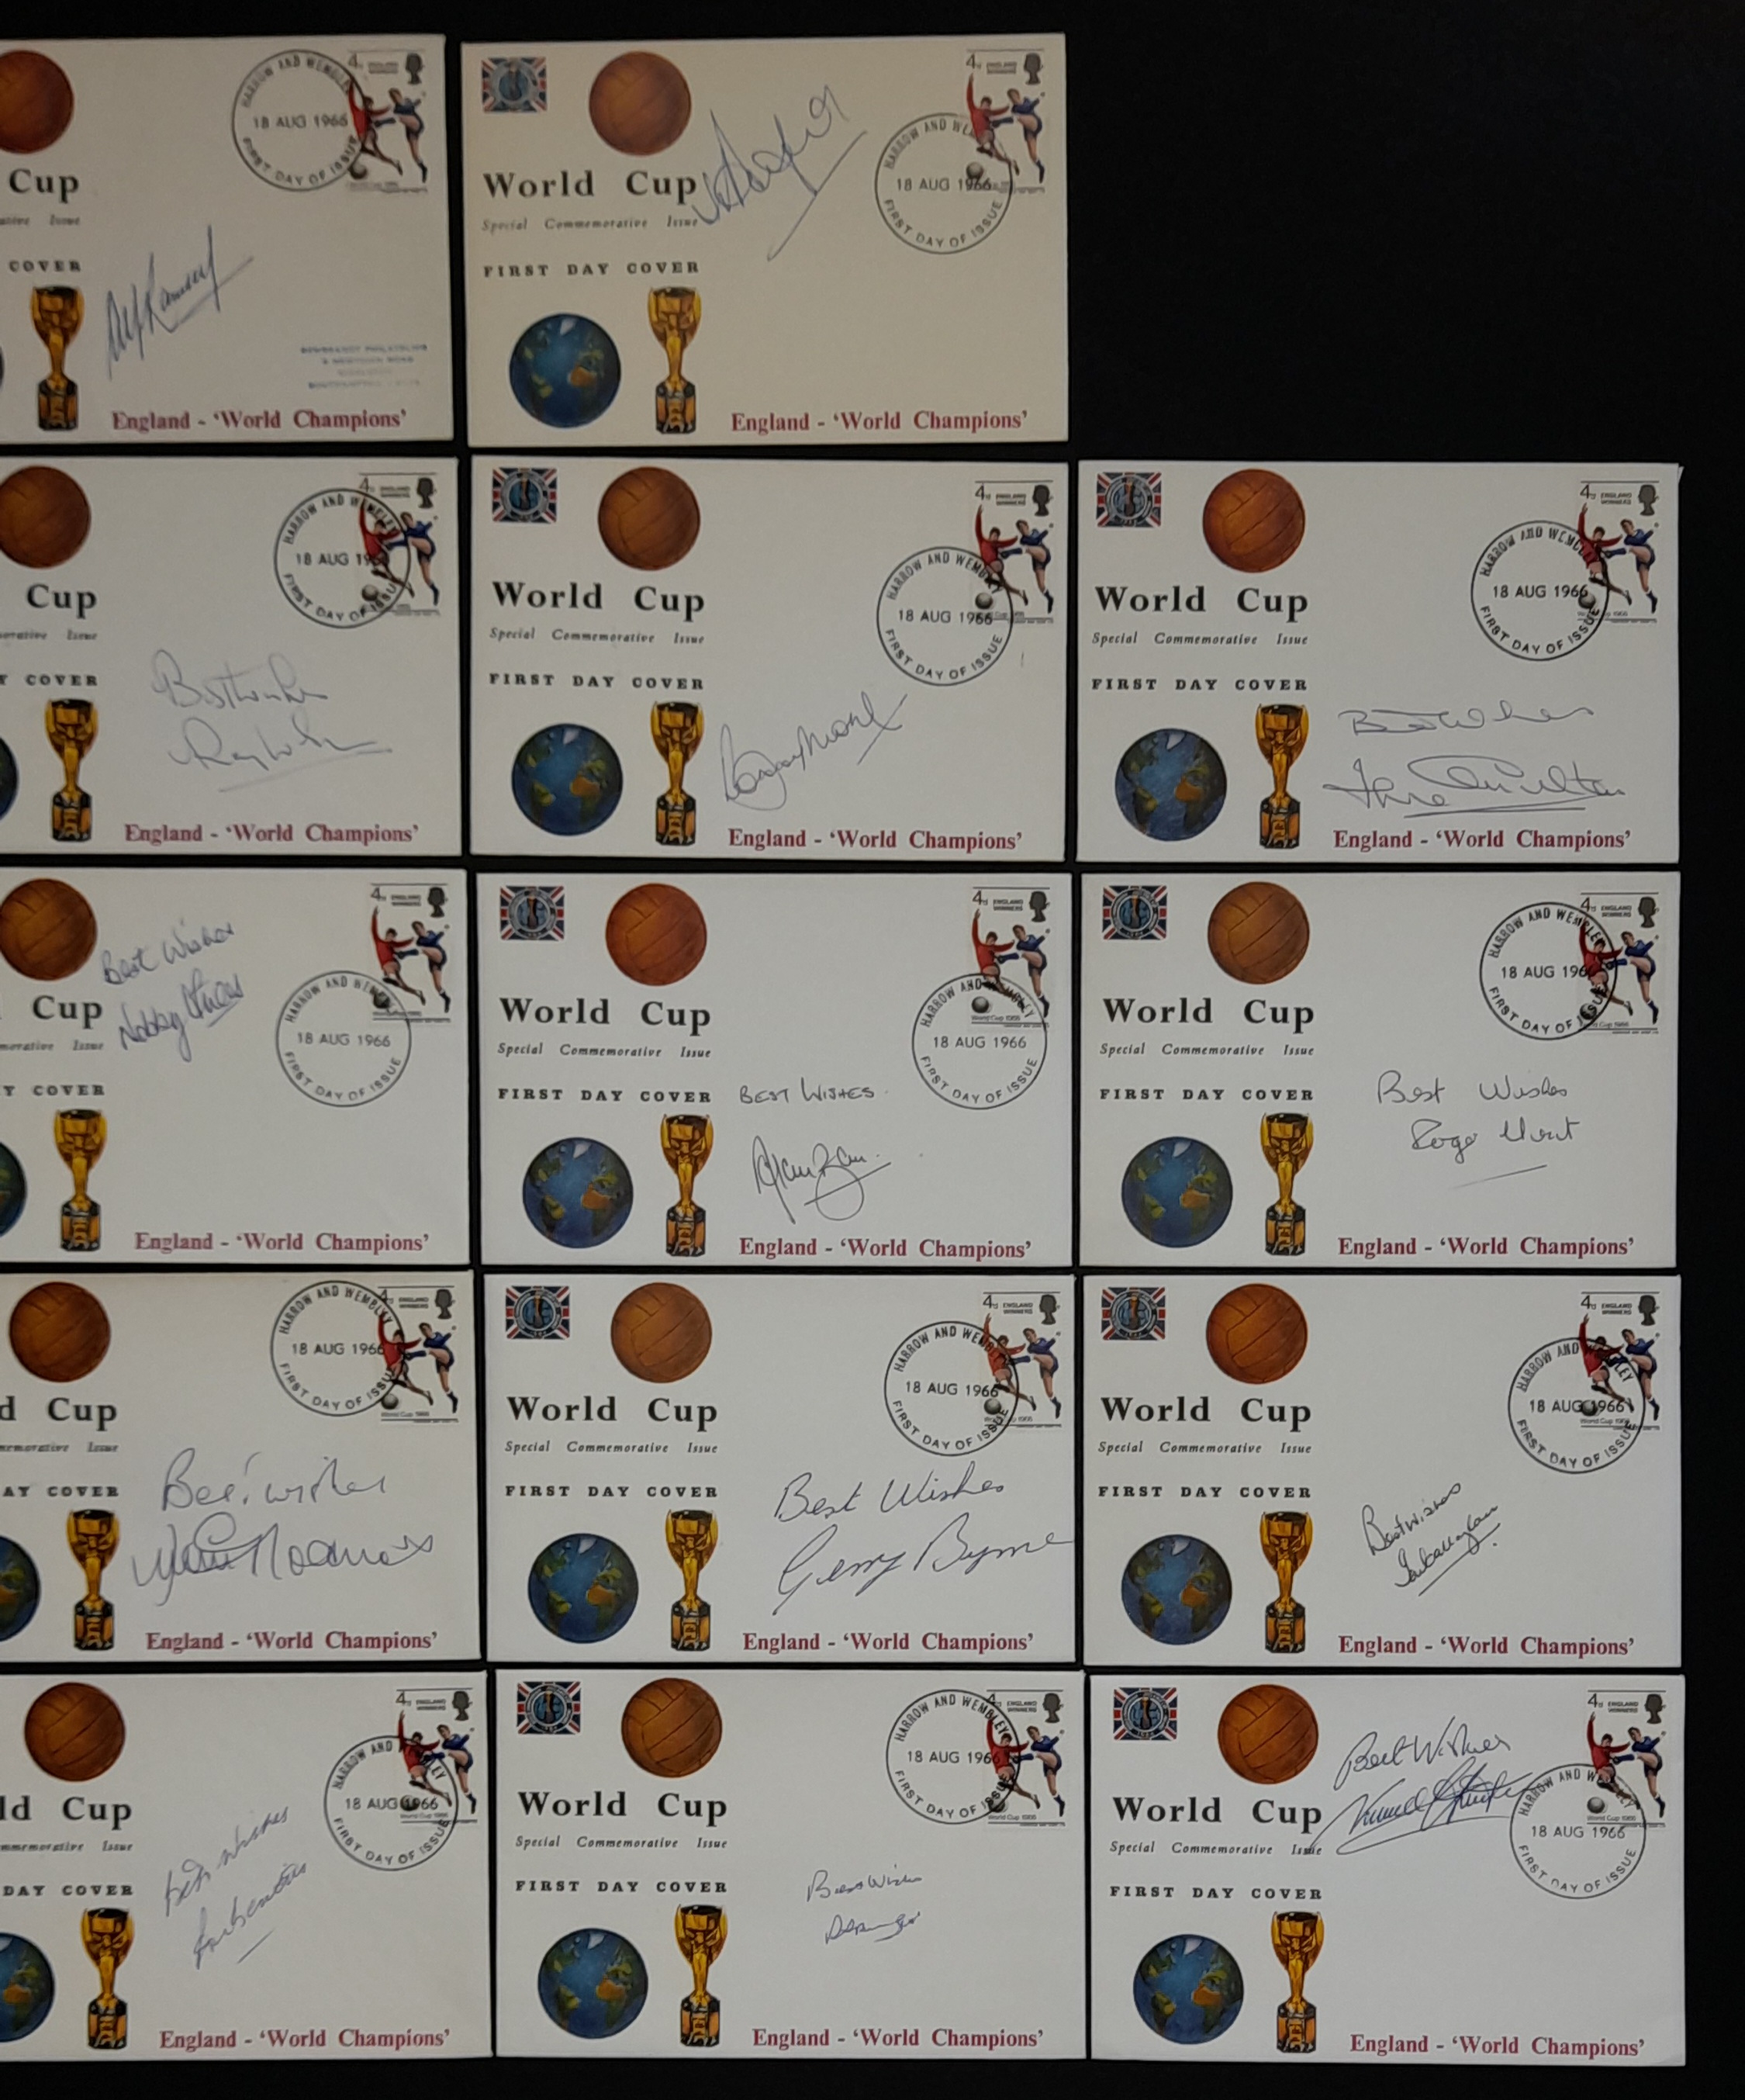 ENGLAND 1966 WORLD CUP WINNERS FULL SET OF 23 AUTOGRAPHED REMBRANDT POSTAL COVERS - Bild 2 aus 4